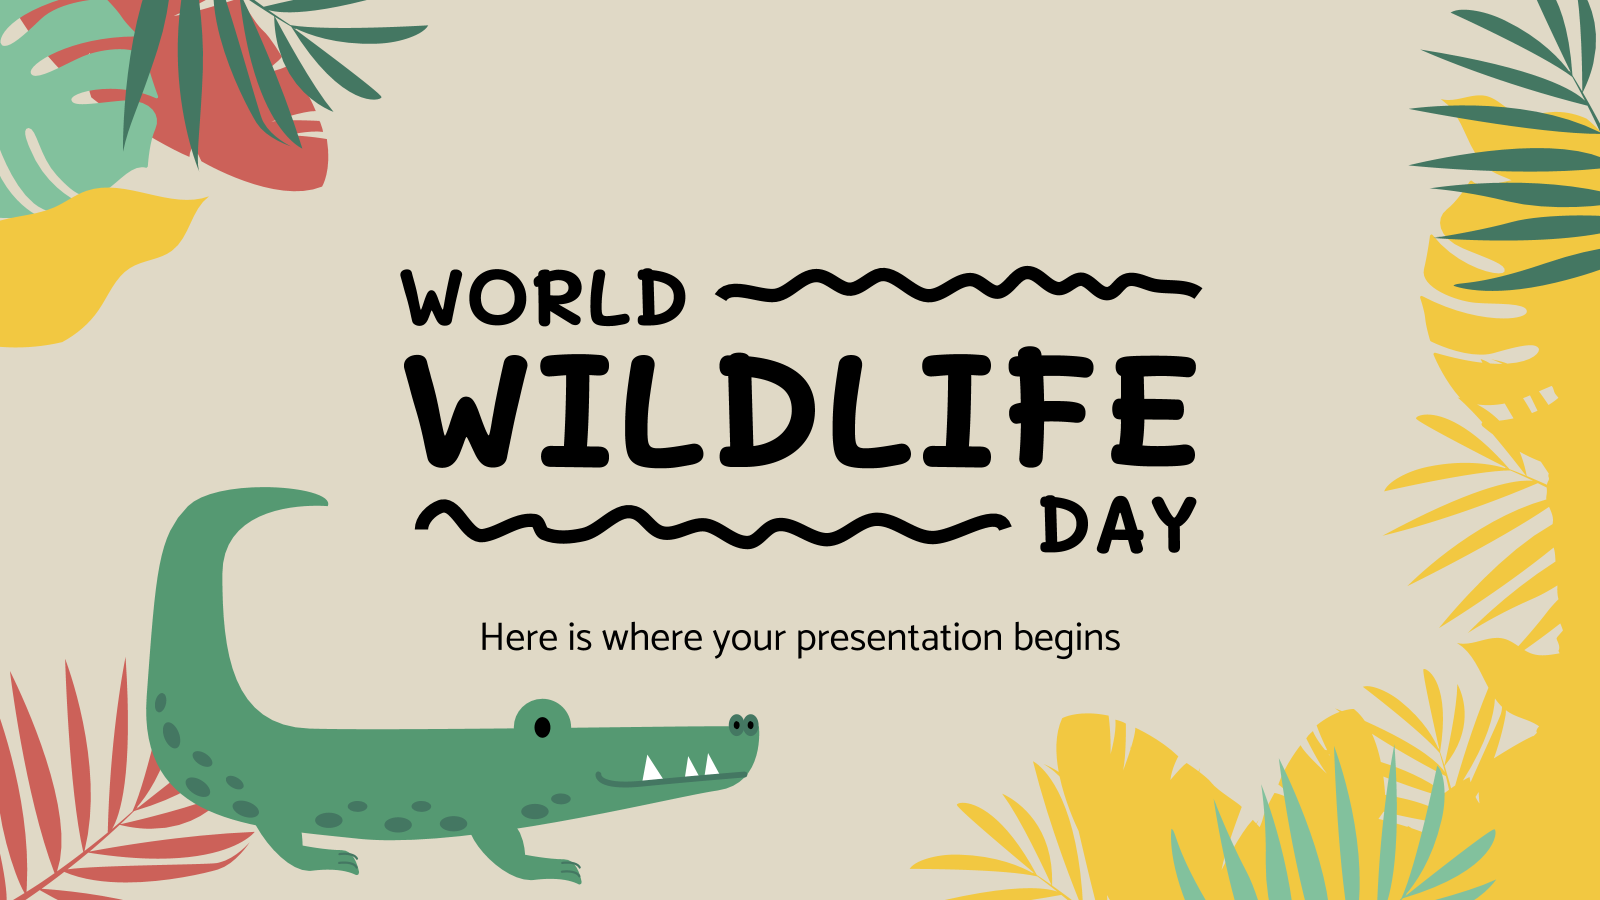 World Wildlife Day Google Slides Theme and PowerPoint Template.